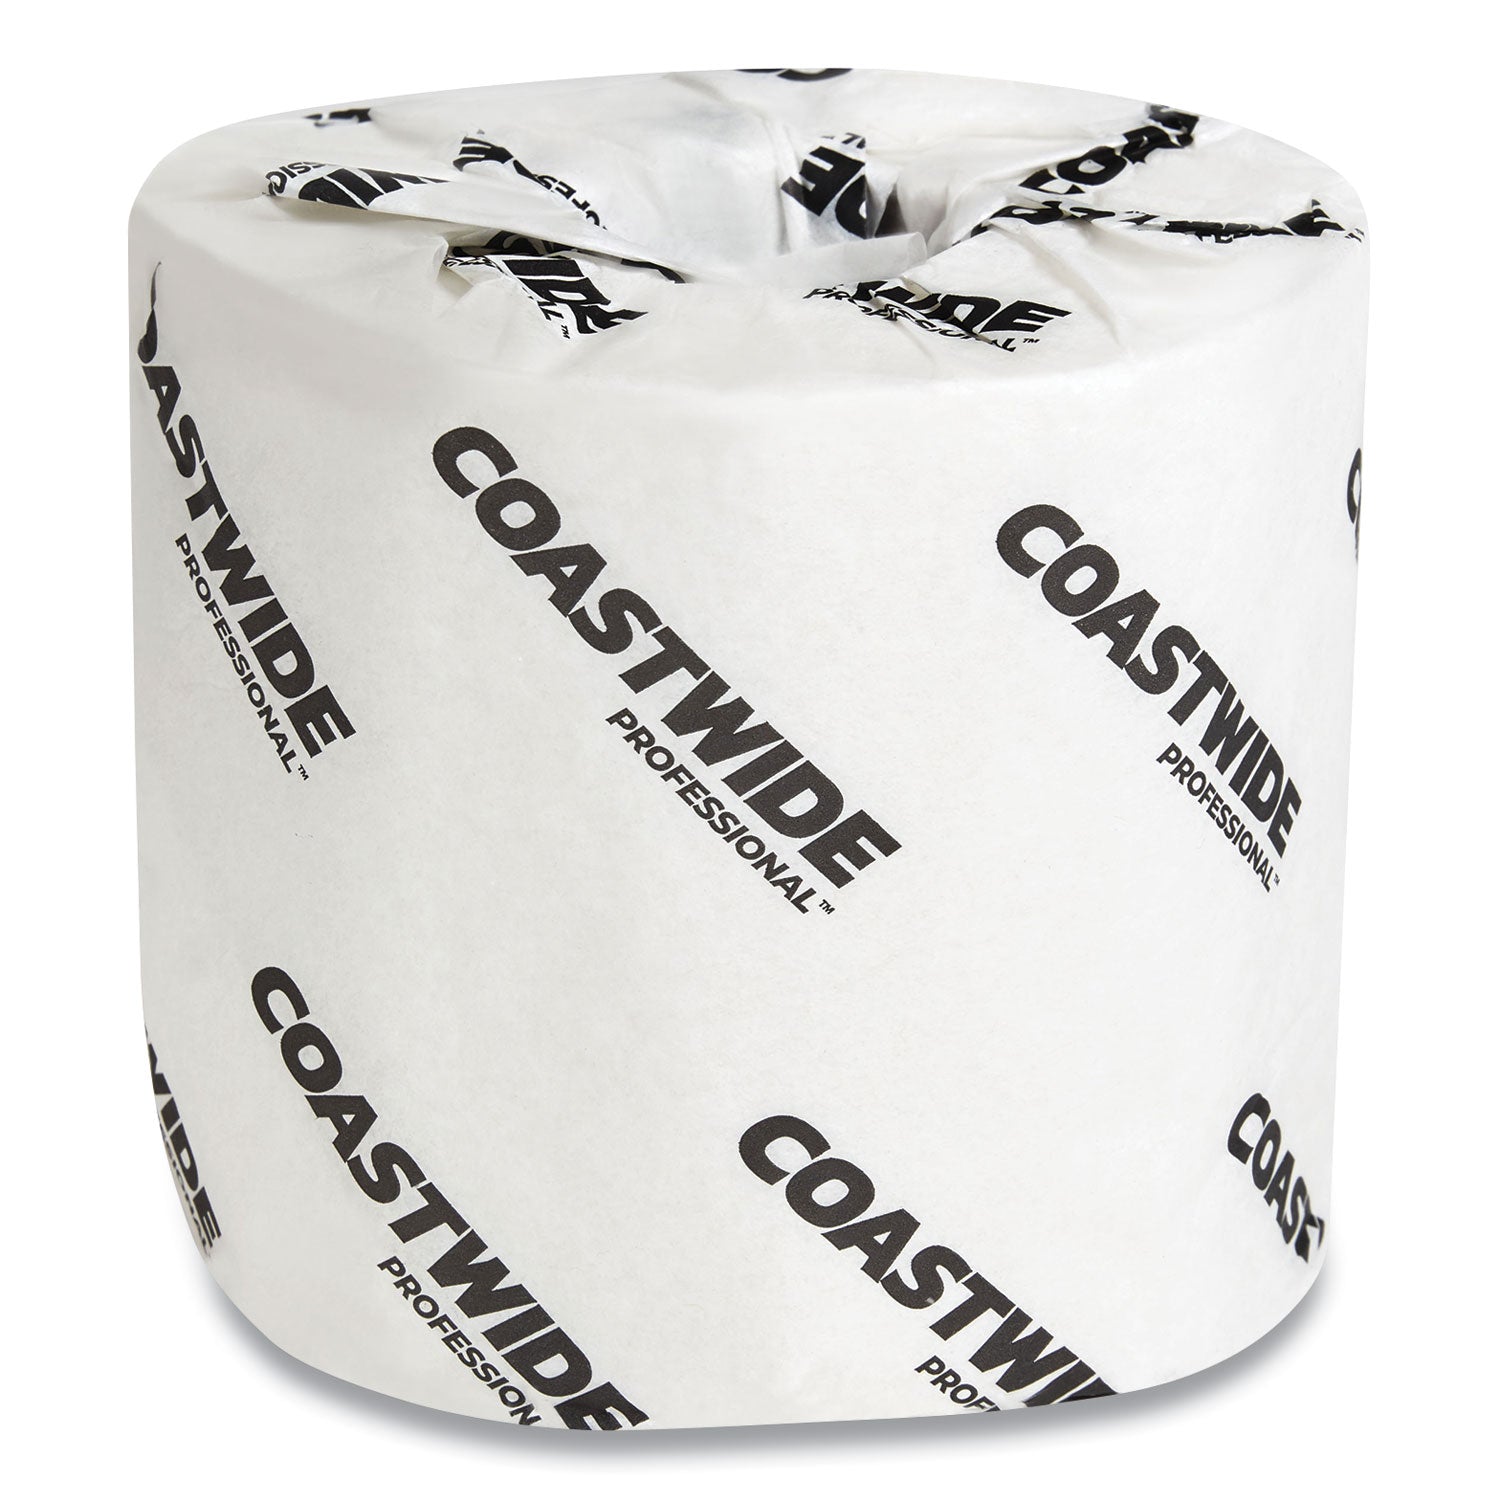 2-ply-standard-toilet-paper-septic-safe-white-500-sheets-roll-96-rolls-carton_cwz365377 - 1